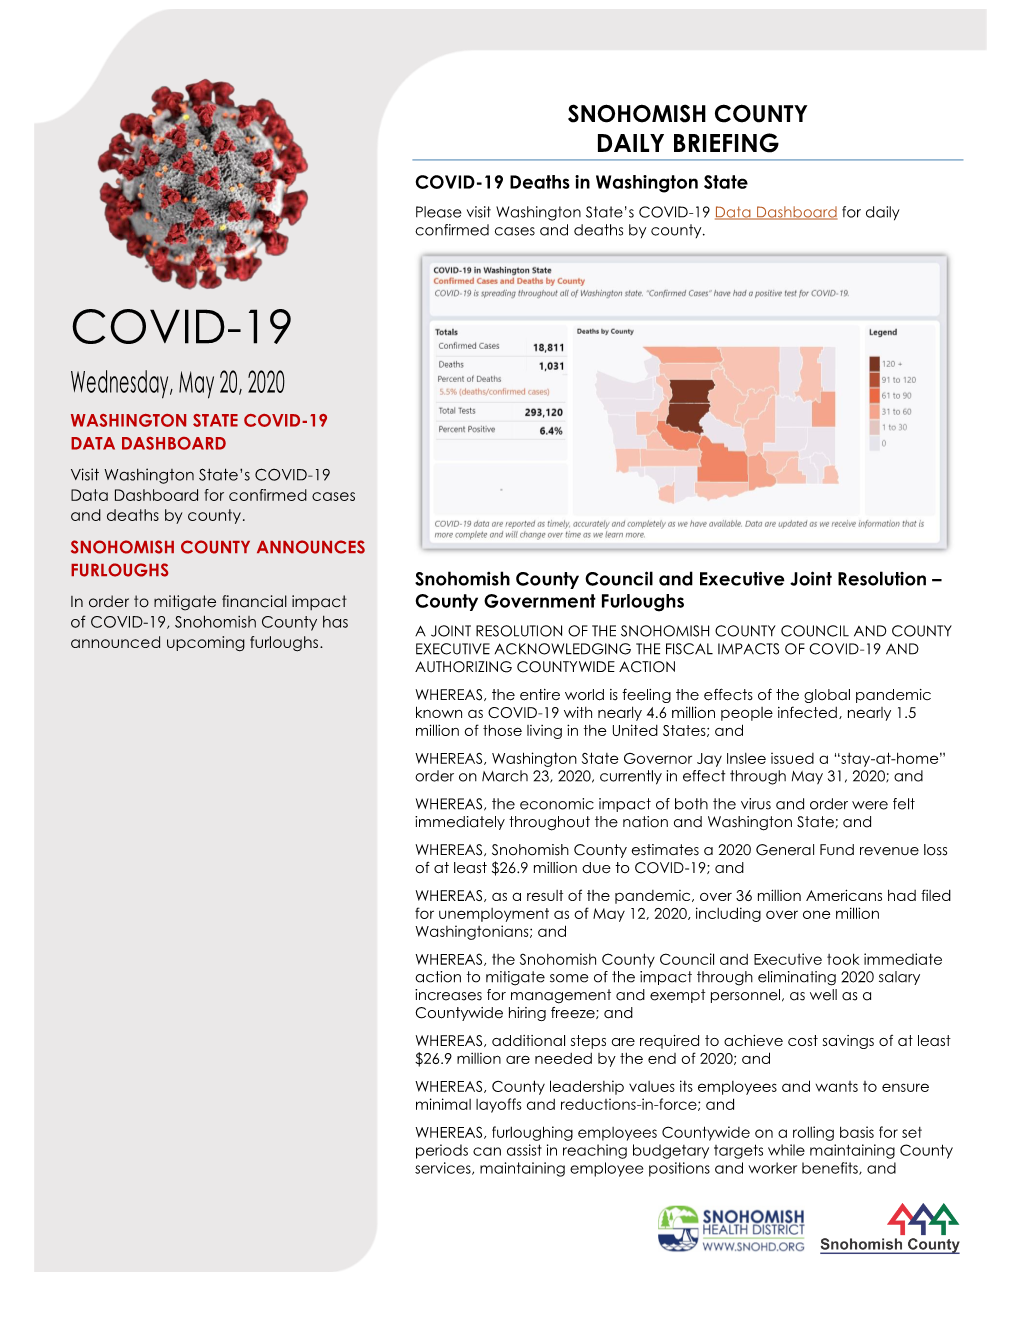 COVID-19 Deaths in Washington State Please Visit Washington State’S COVID-19 Data Dashboard for Daily Confirmed Cases and Deaths by County